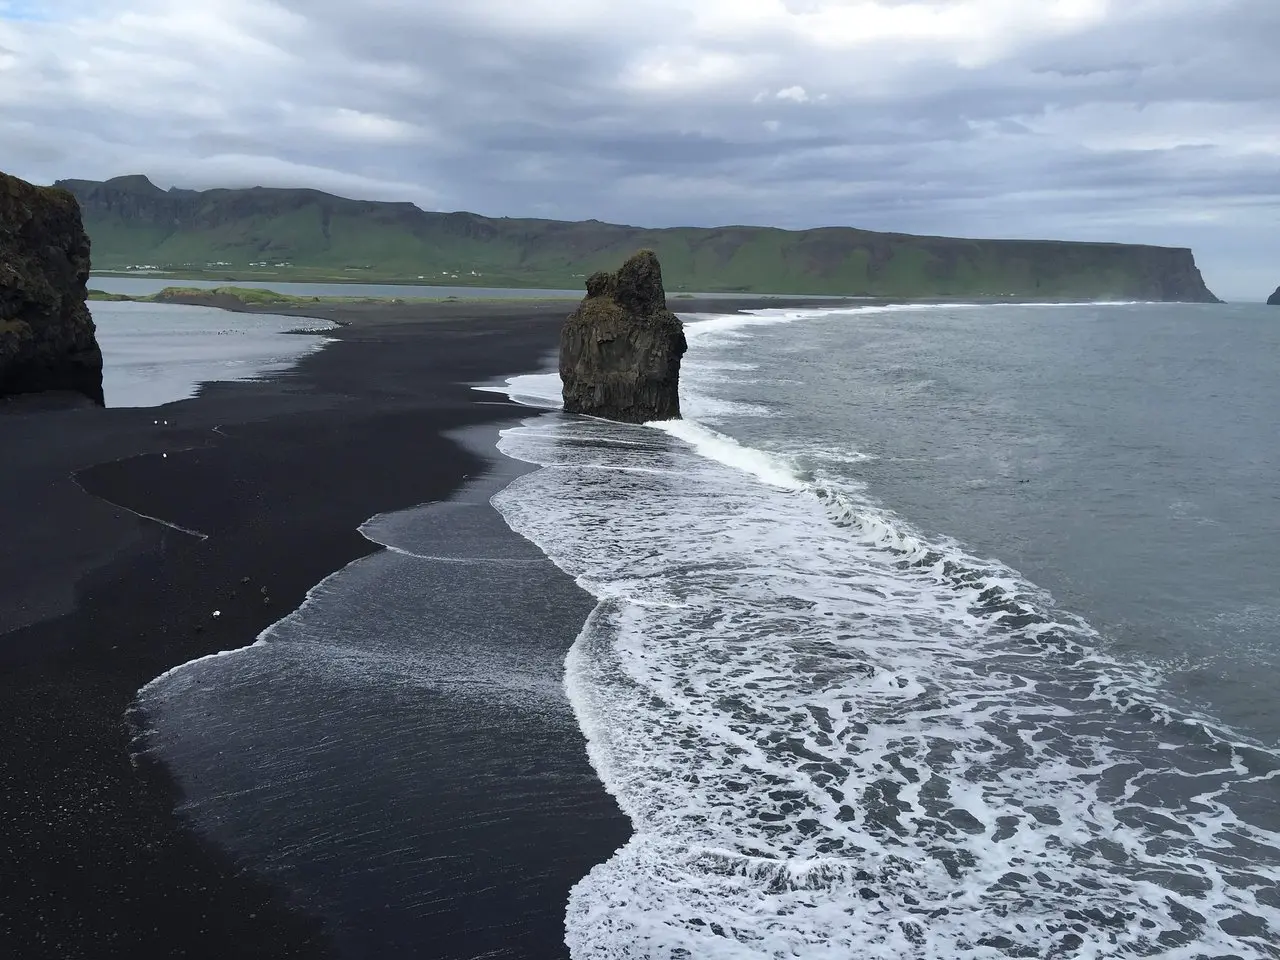 15 Black Sand Beaches That Will Take Your Breath Away